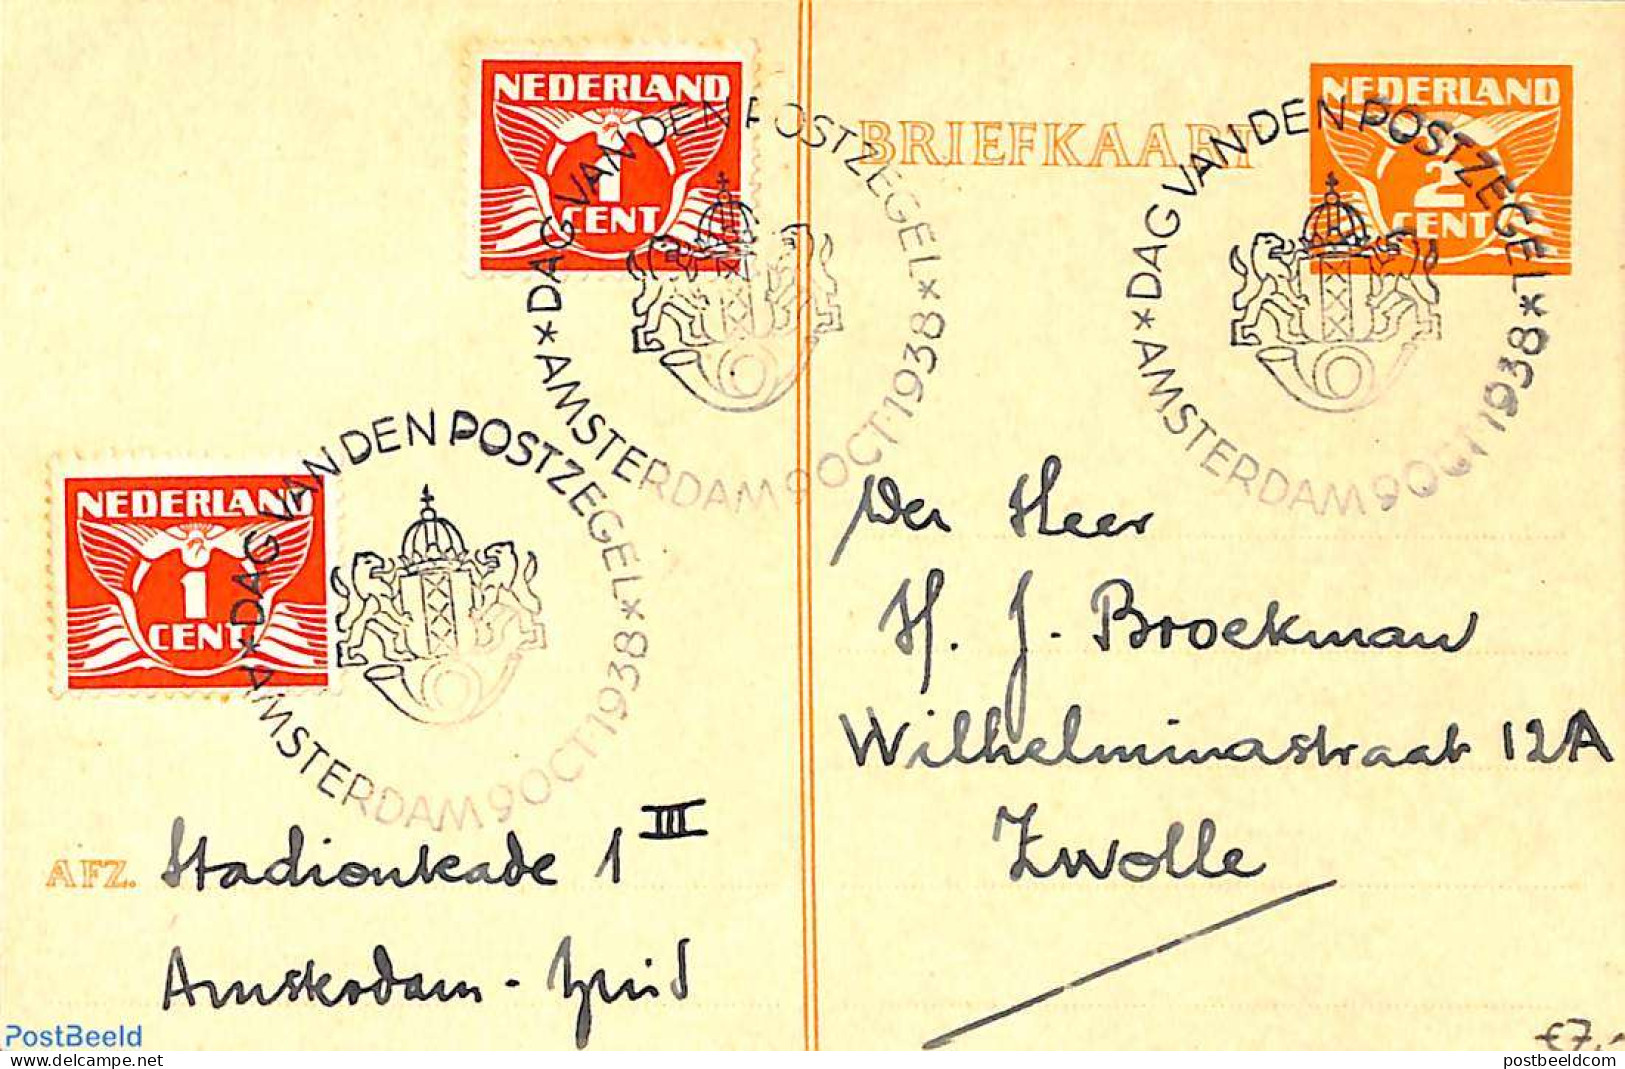 Netherlands, Fdc Stamp Day 1938 Postcard 2c, With Stamp Day Cancellations, Used Postal Stationary, Stamp Day - Stamp's Day